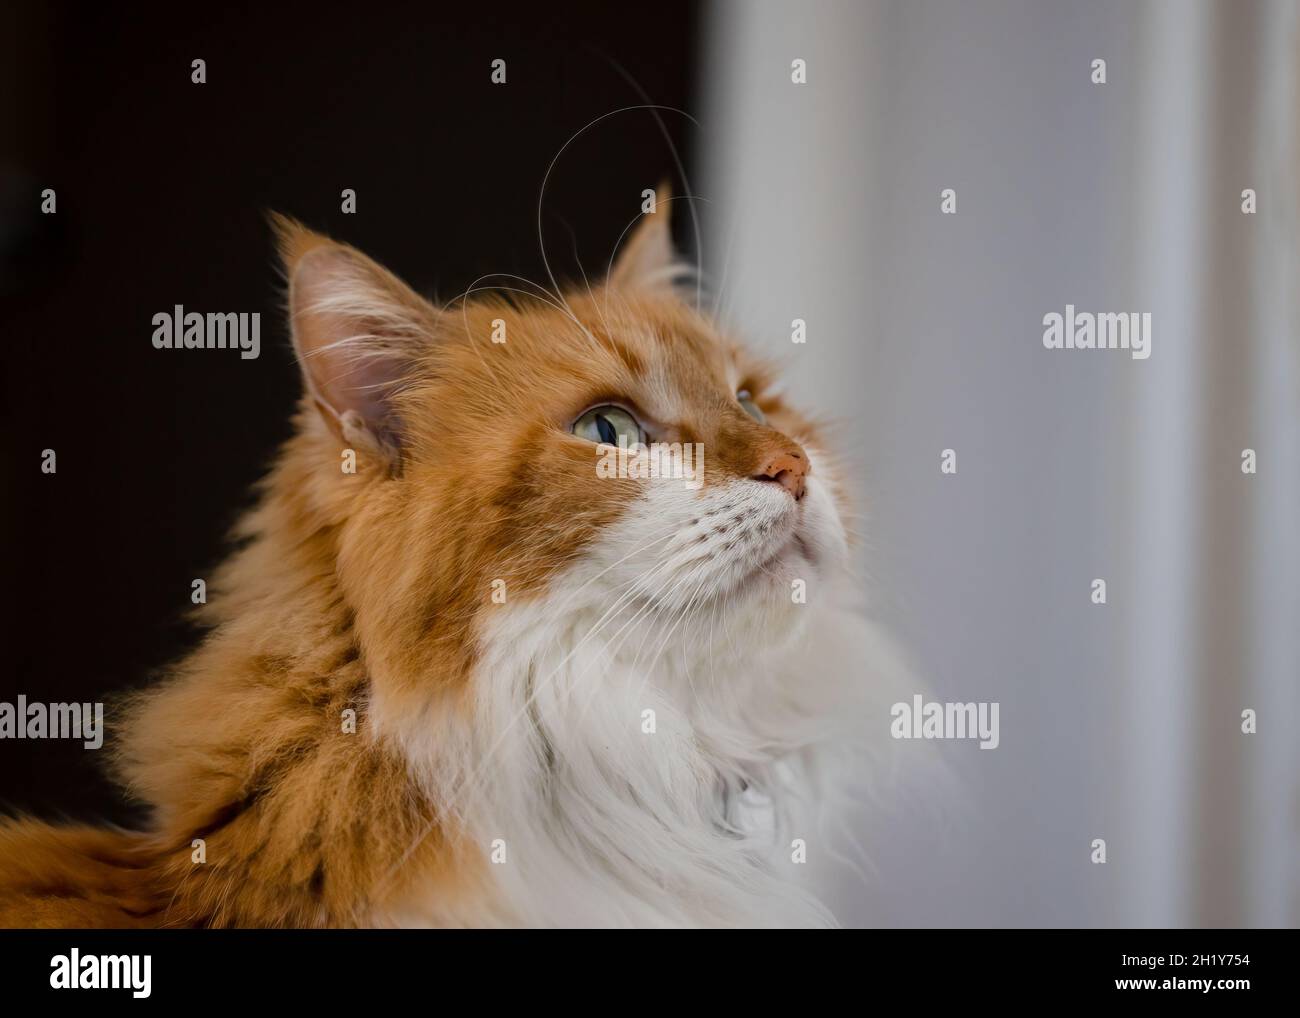 Maine Coon cat looking up Stock Photo